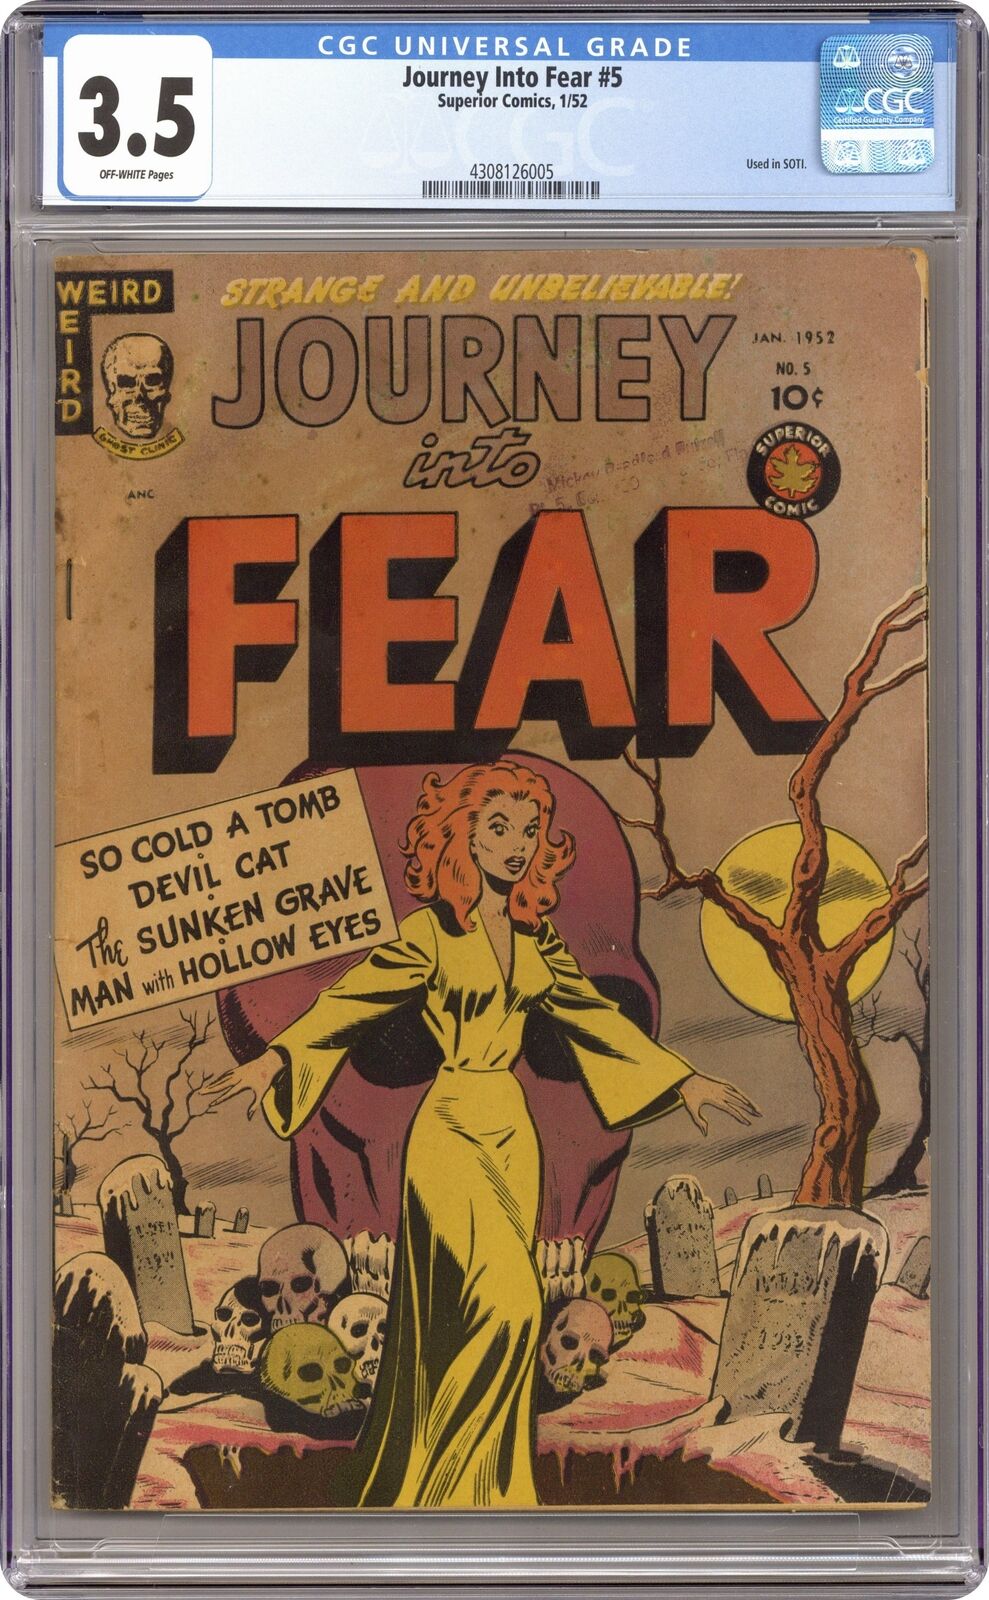 Journey into Fear #5 CGC 3.5 1952 4308126005